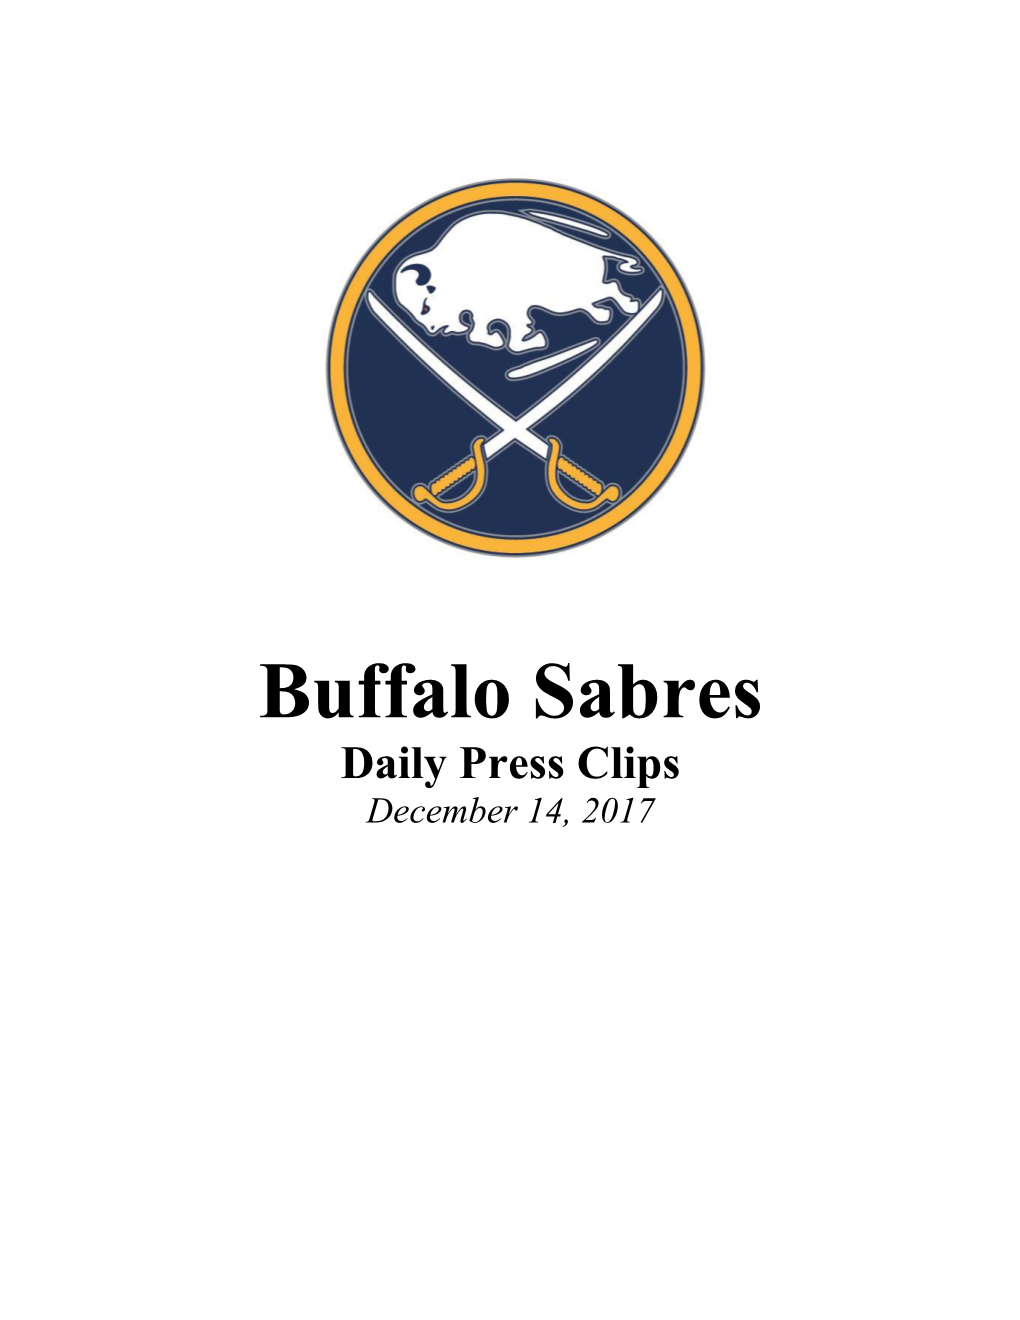 Daily Press Clips December 14, 2017